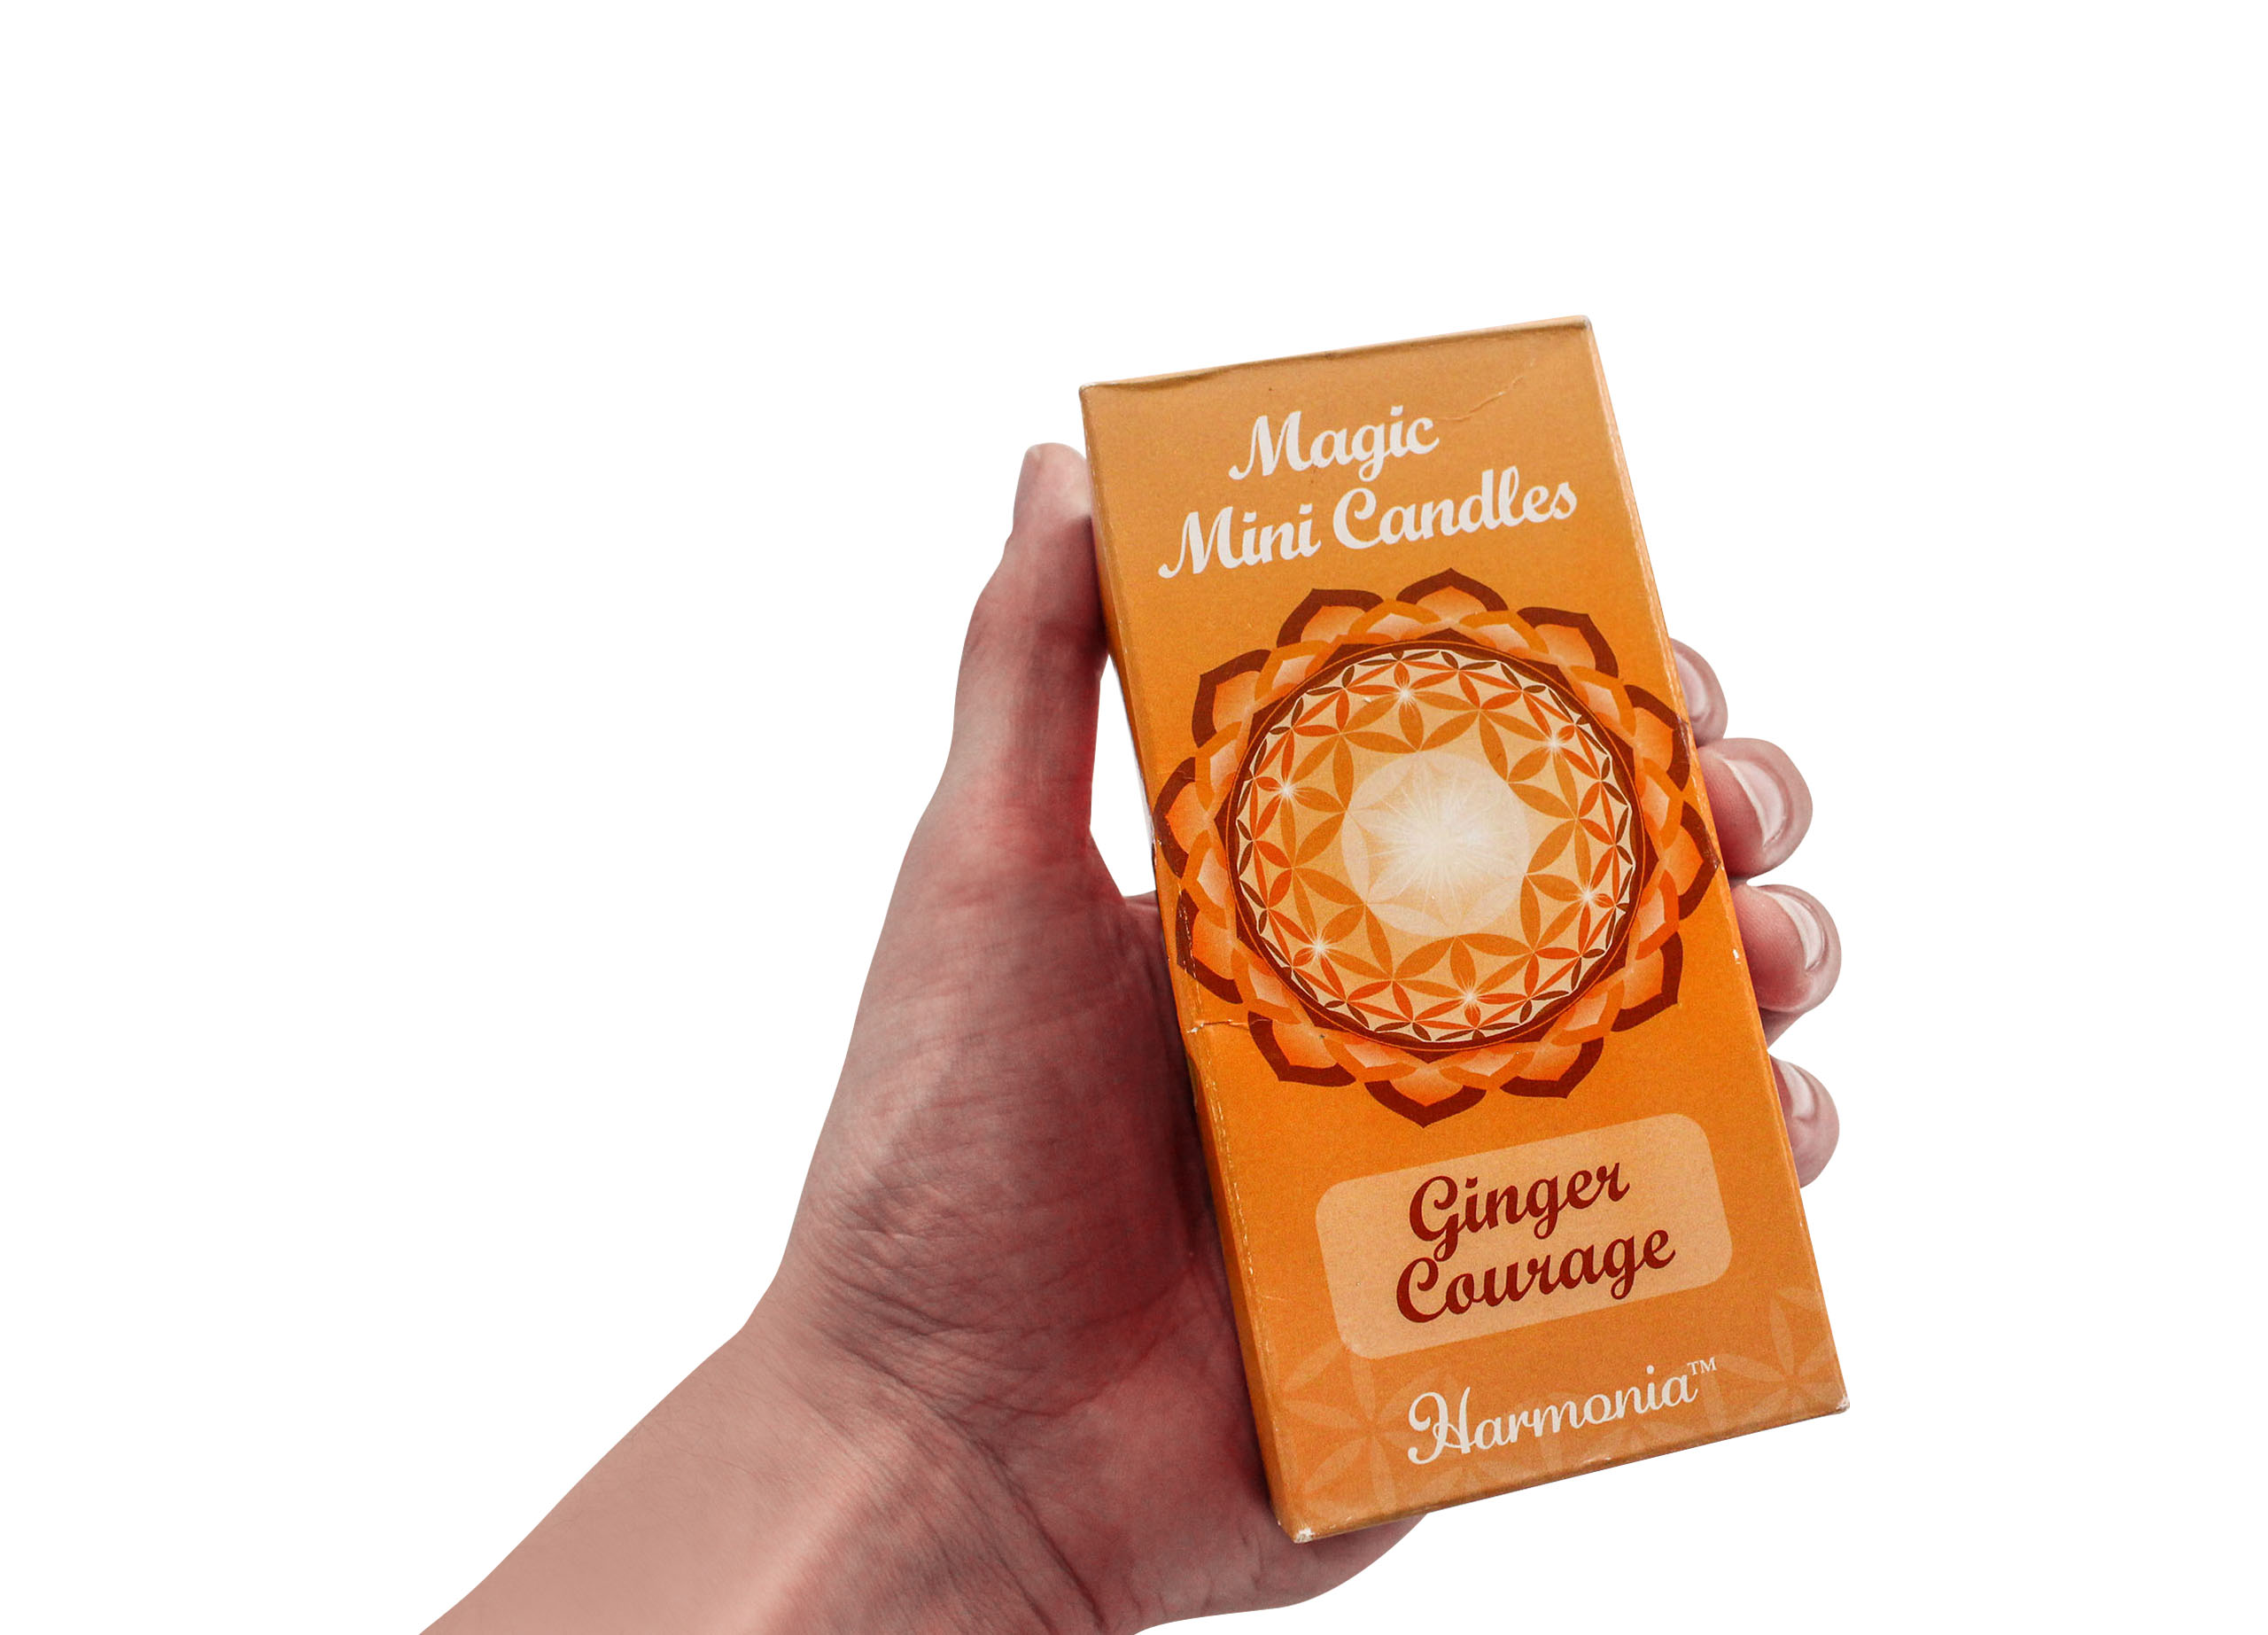 Ginger/Courage Magic Mini Candles - Crystal Dreams